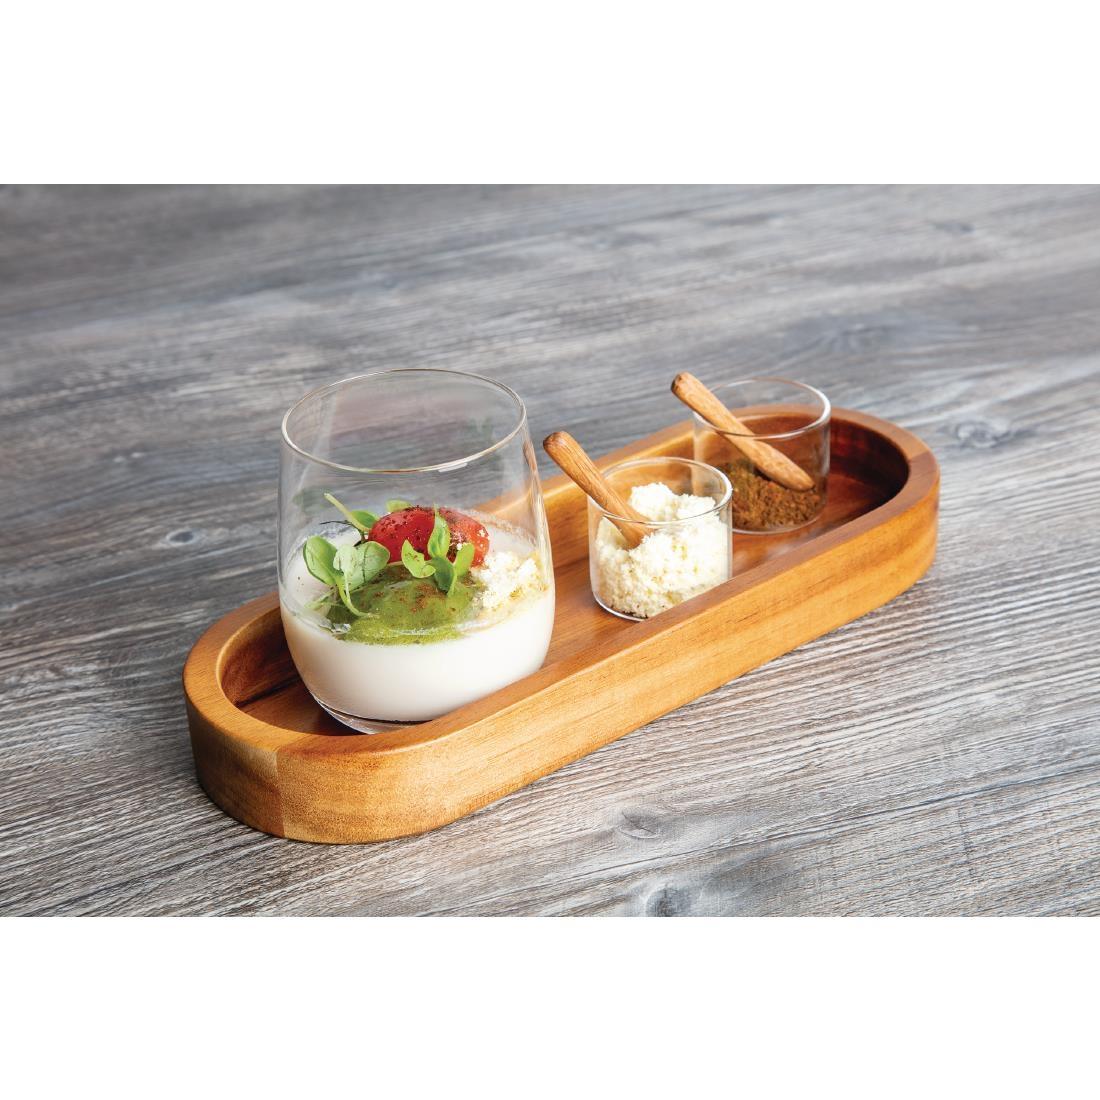 Wooden Condiments Tray - GH308  - 4